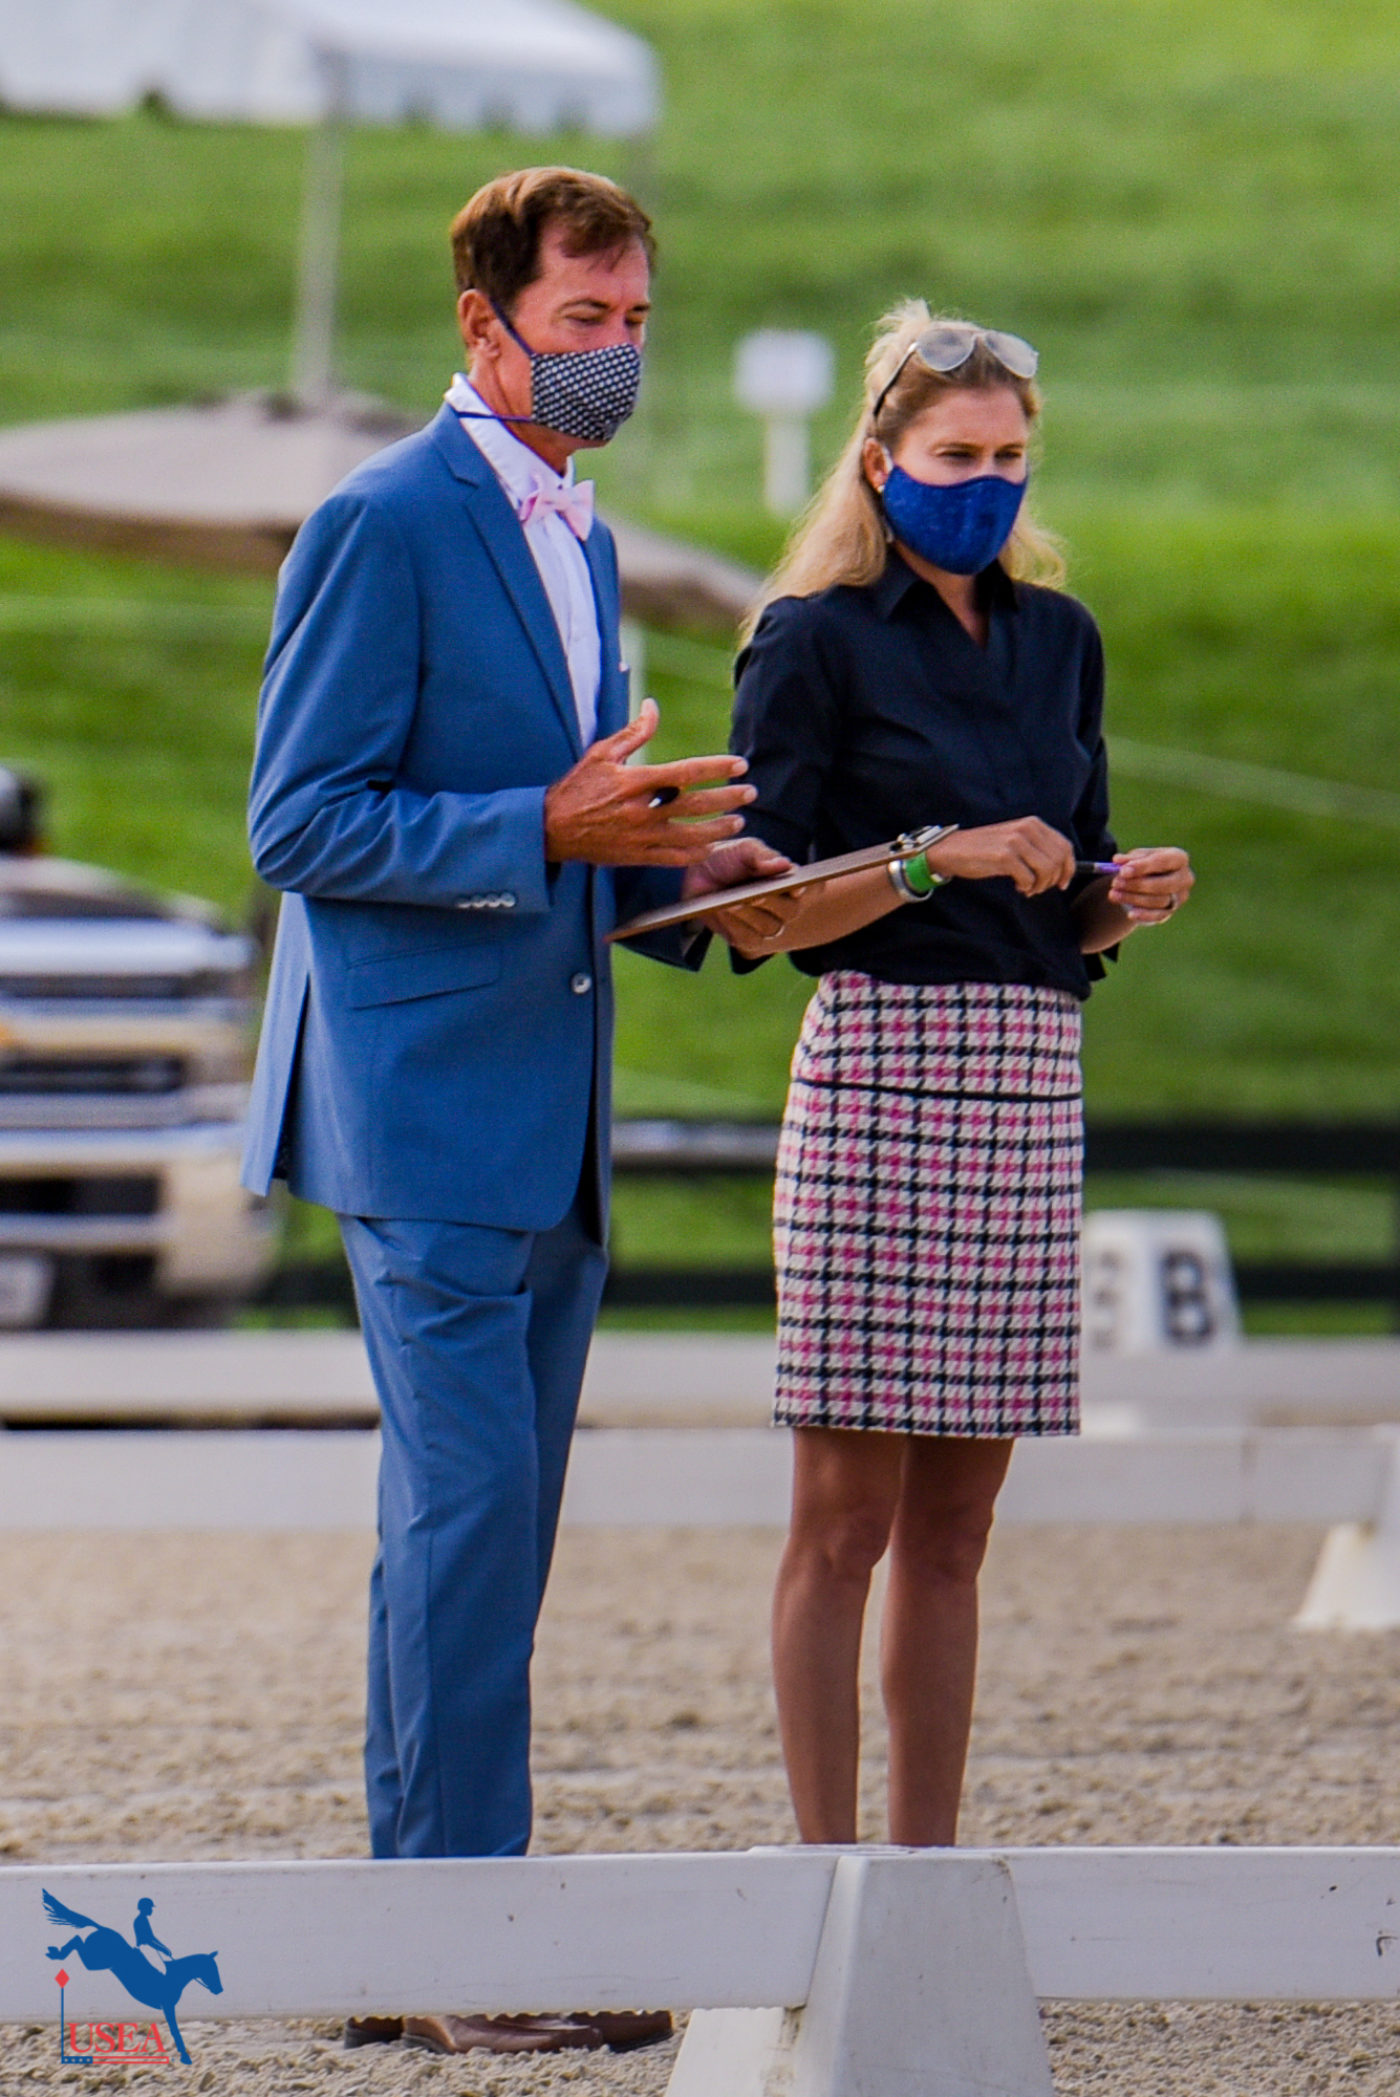 Masks, but make it fashion. The CCI4*-S judges looked ready to officiate.